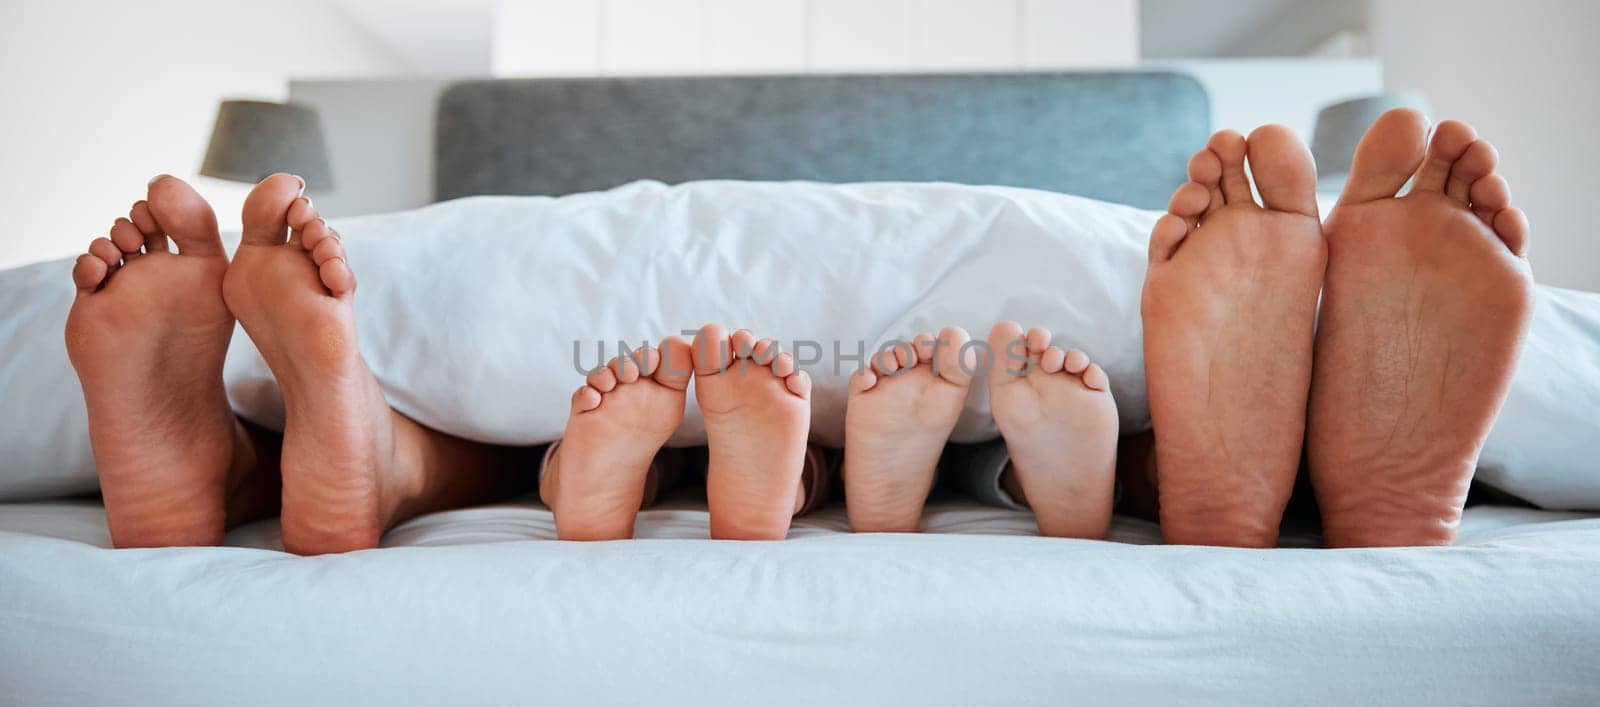 Family feet, bed and blanket in closeup, parents or kids sleeping on holiday in morning, care and relax. Bedroom, people and sleep with mom, dad or children on vacation, home or break in hospitality.